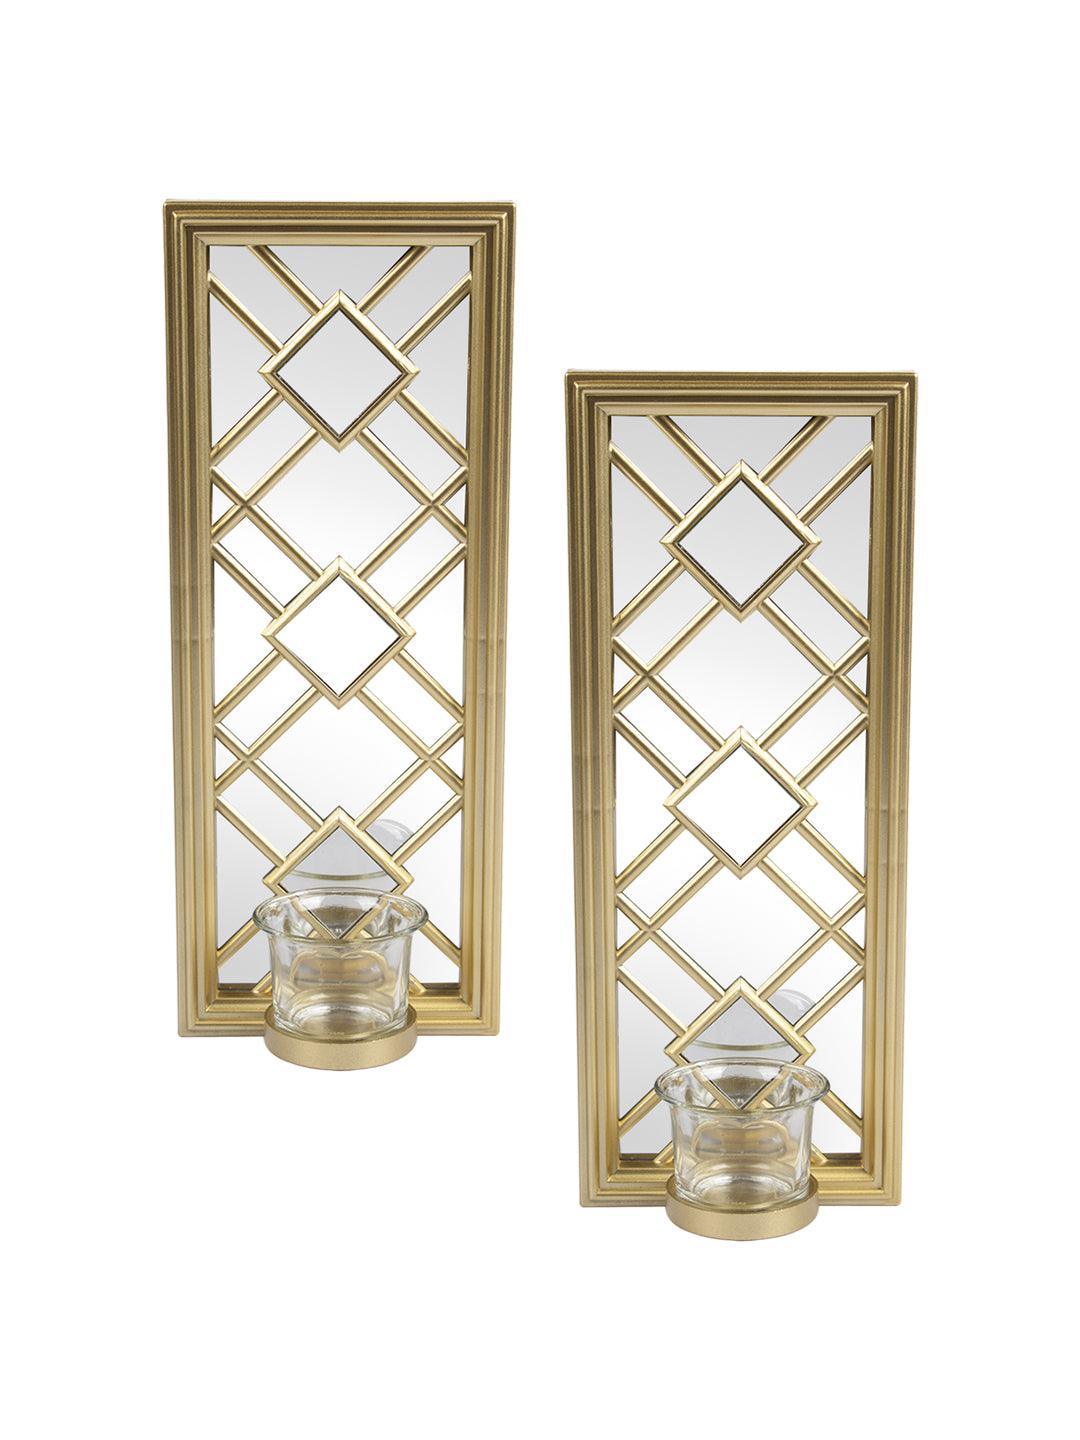 Decorative Vertical Wall Sconce Candle Holder - MARKET 99